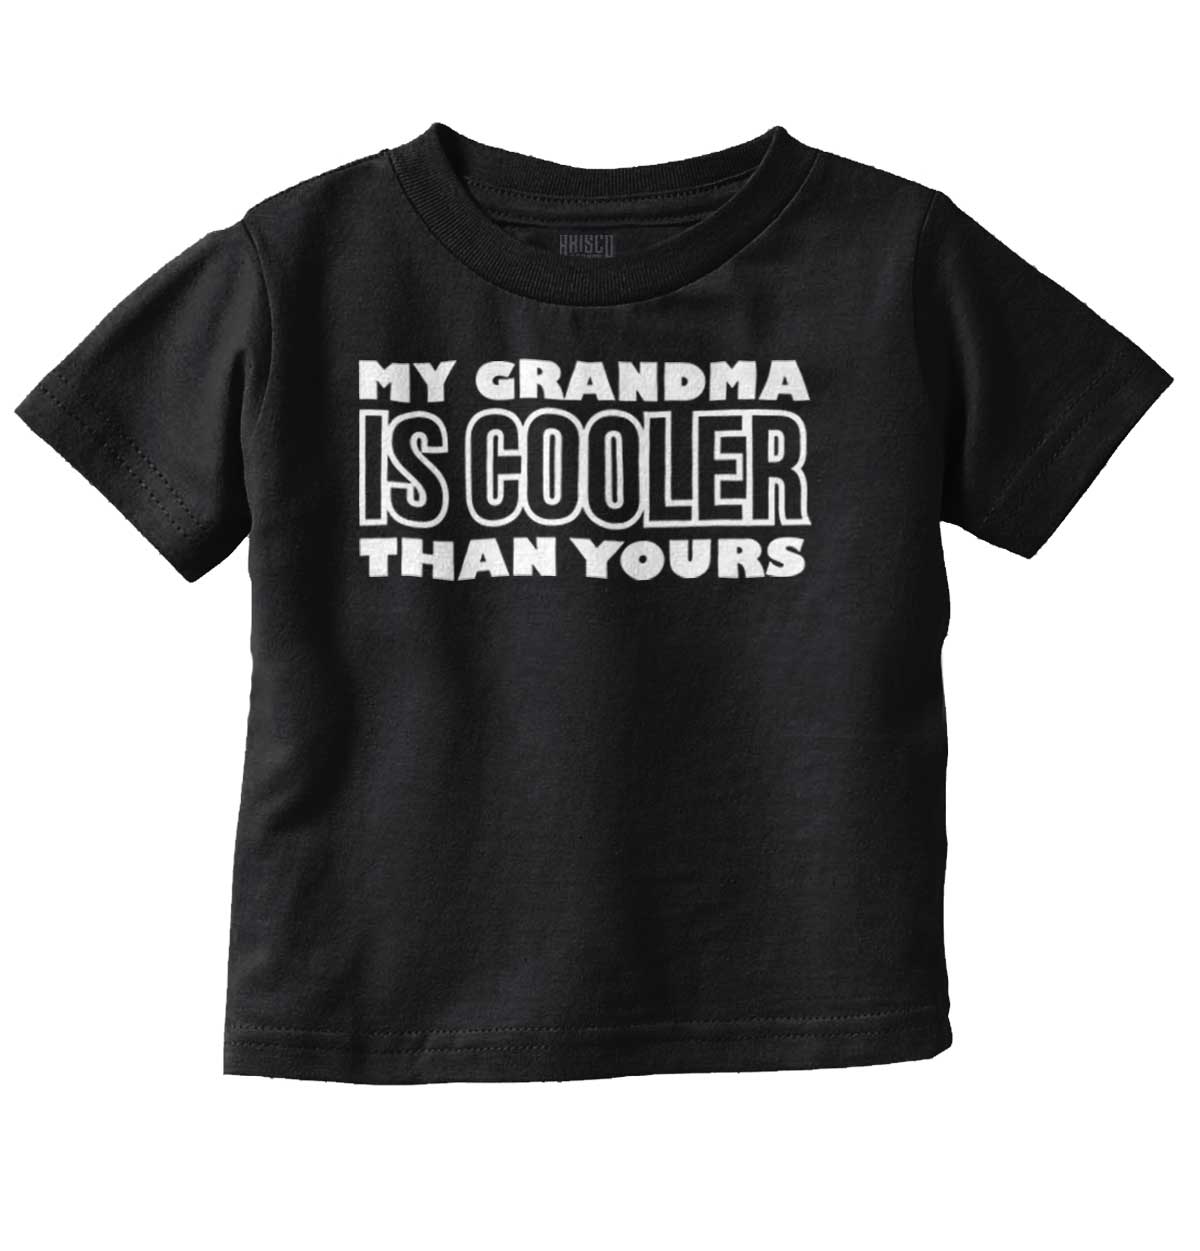 Grandma Is Cooler Than Yours Infant Toddler T Shirt | Brisco Baby Black / 5 Toddler